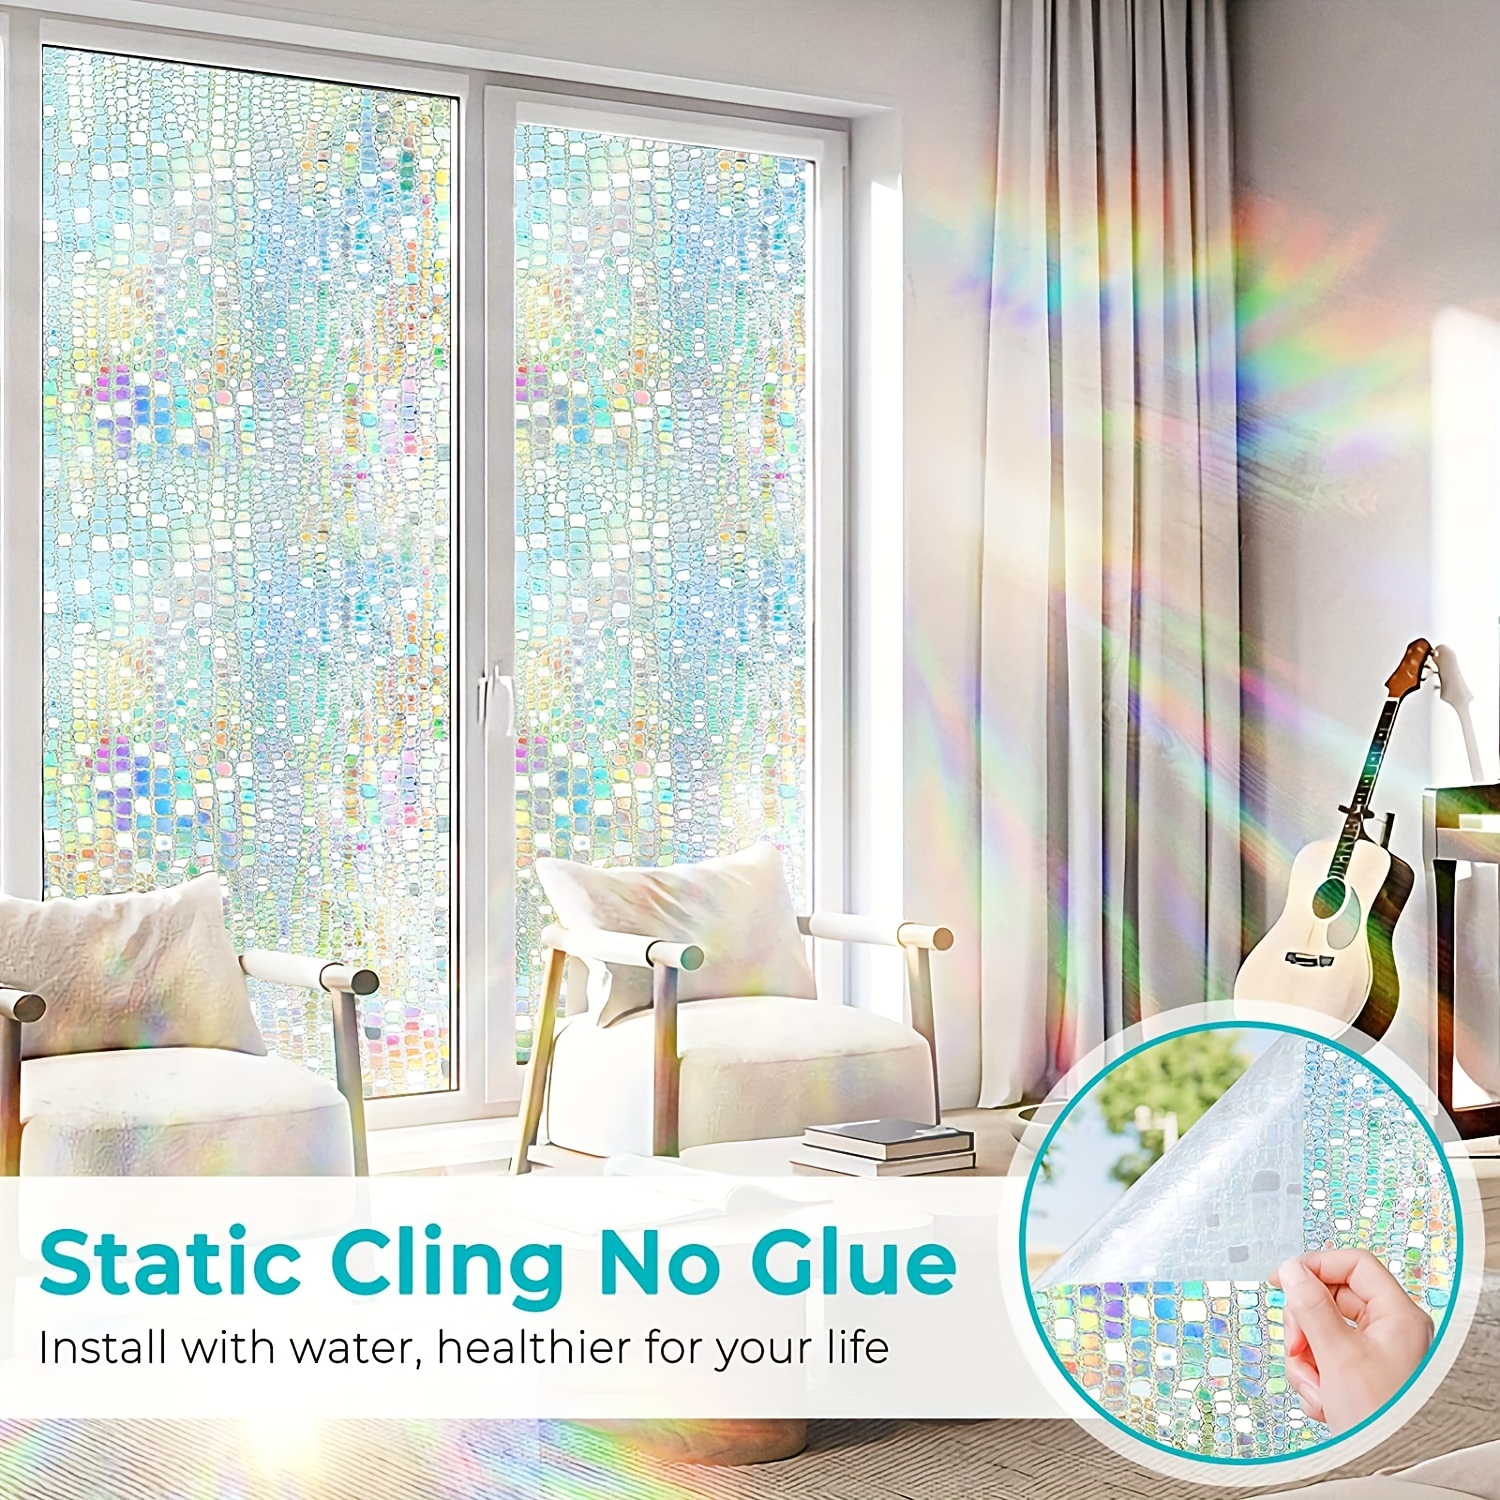 Window Privacy Film,No Glue Static Cling Window Sticker,3D Stained